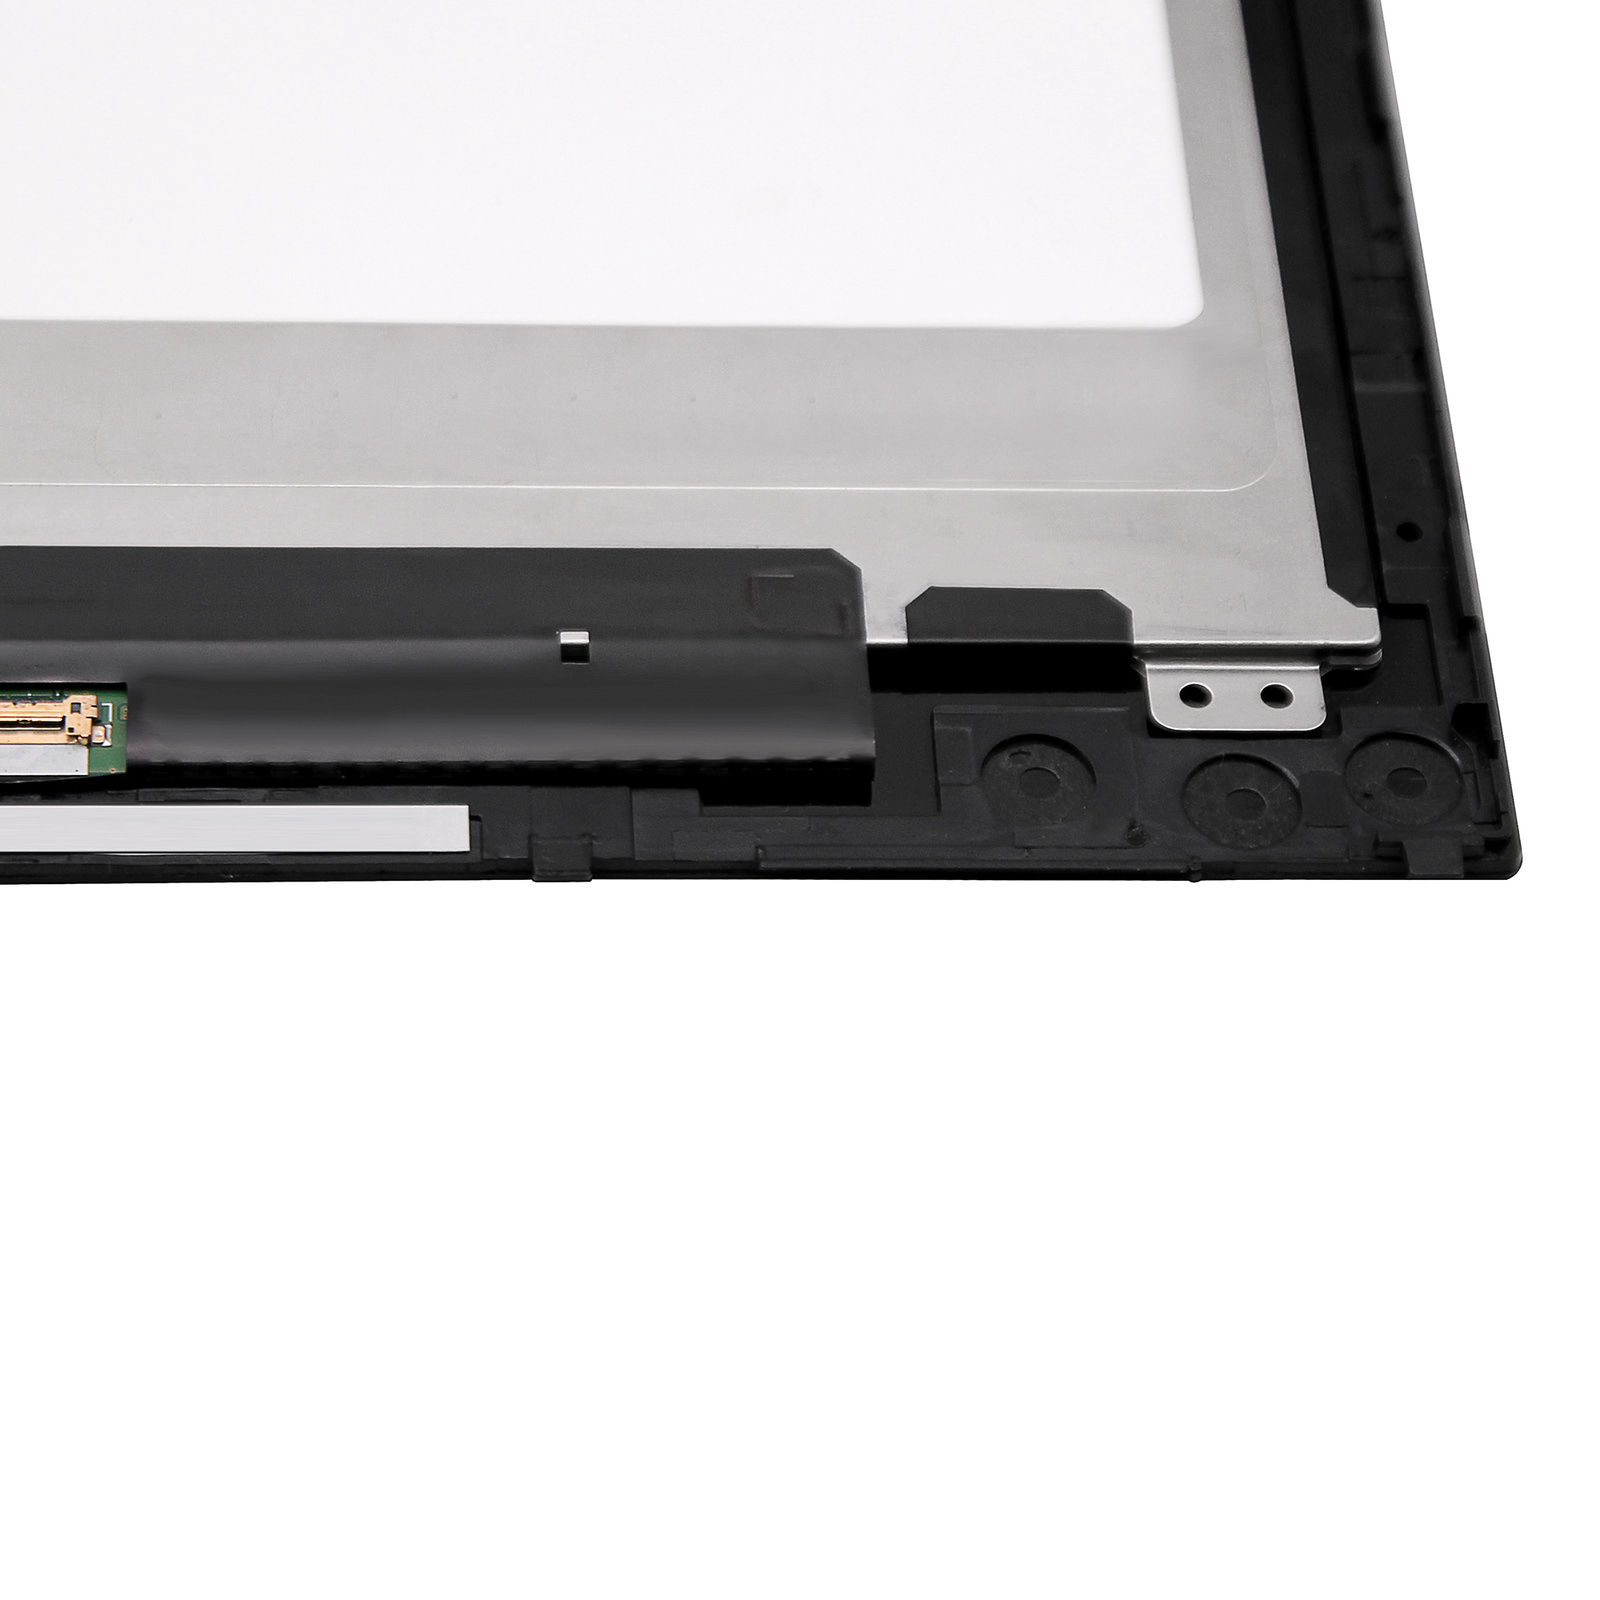 Screen Display Replacement For HP PAVILION X360 13-U169TU LCD Touch Digitizer Assembly